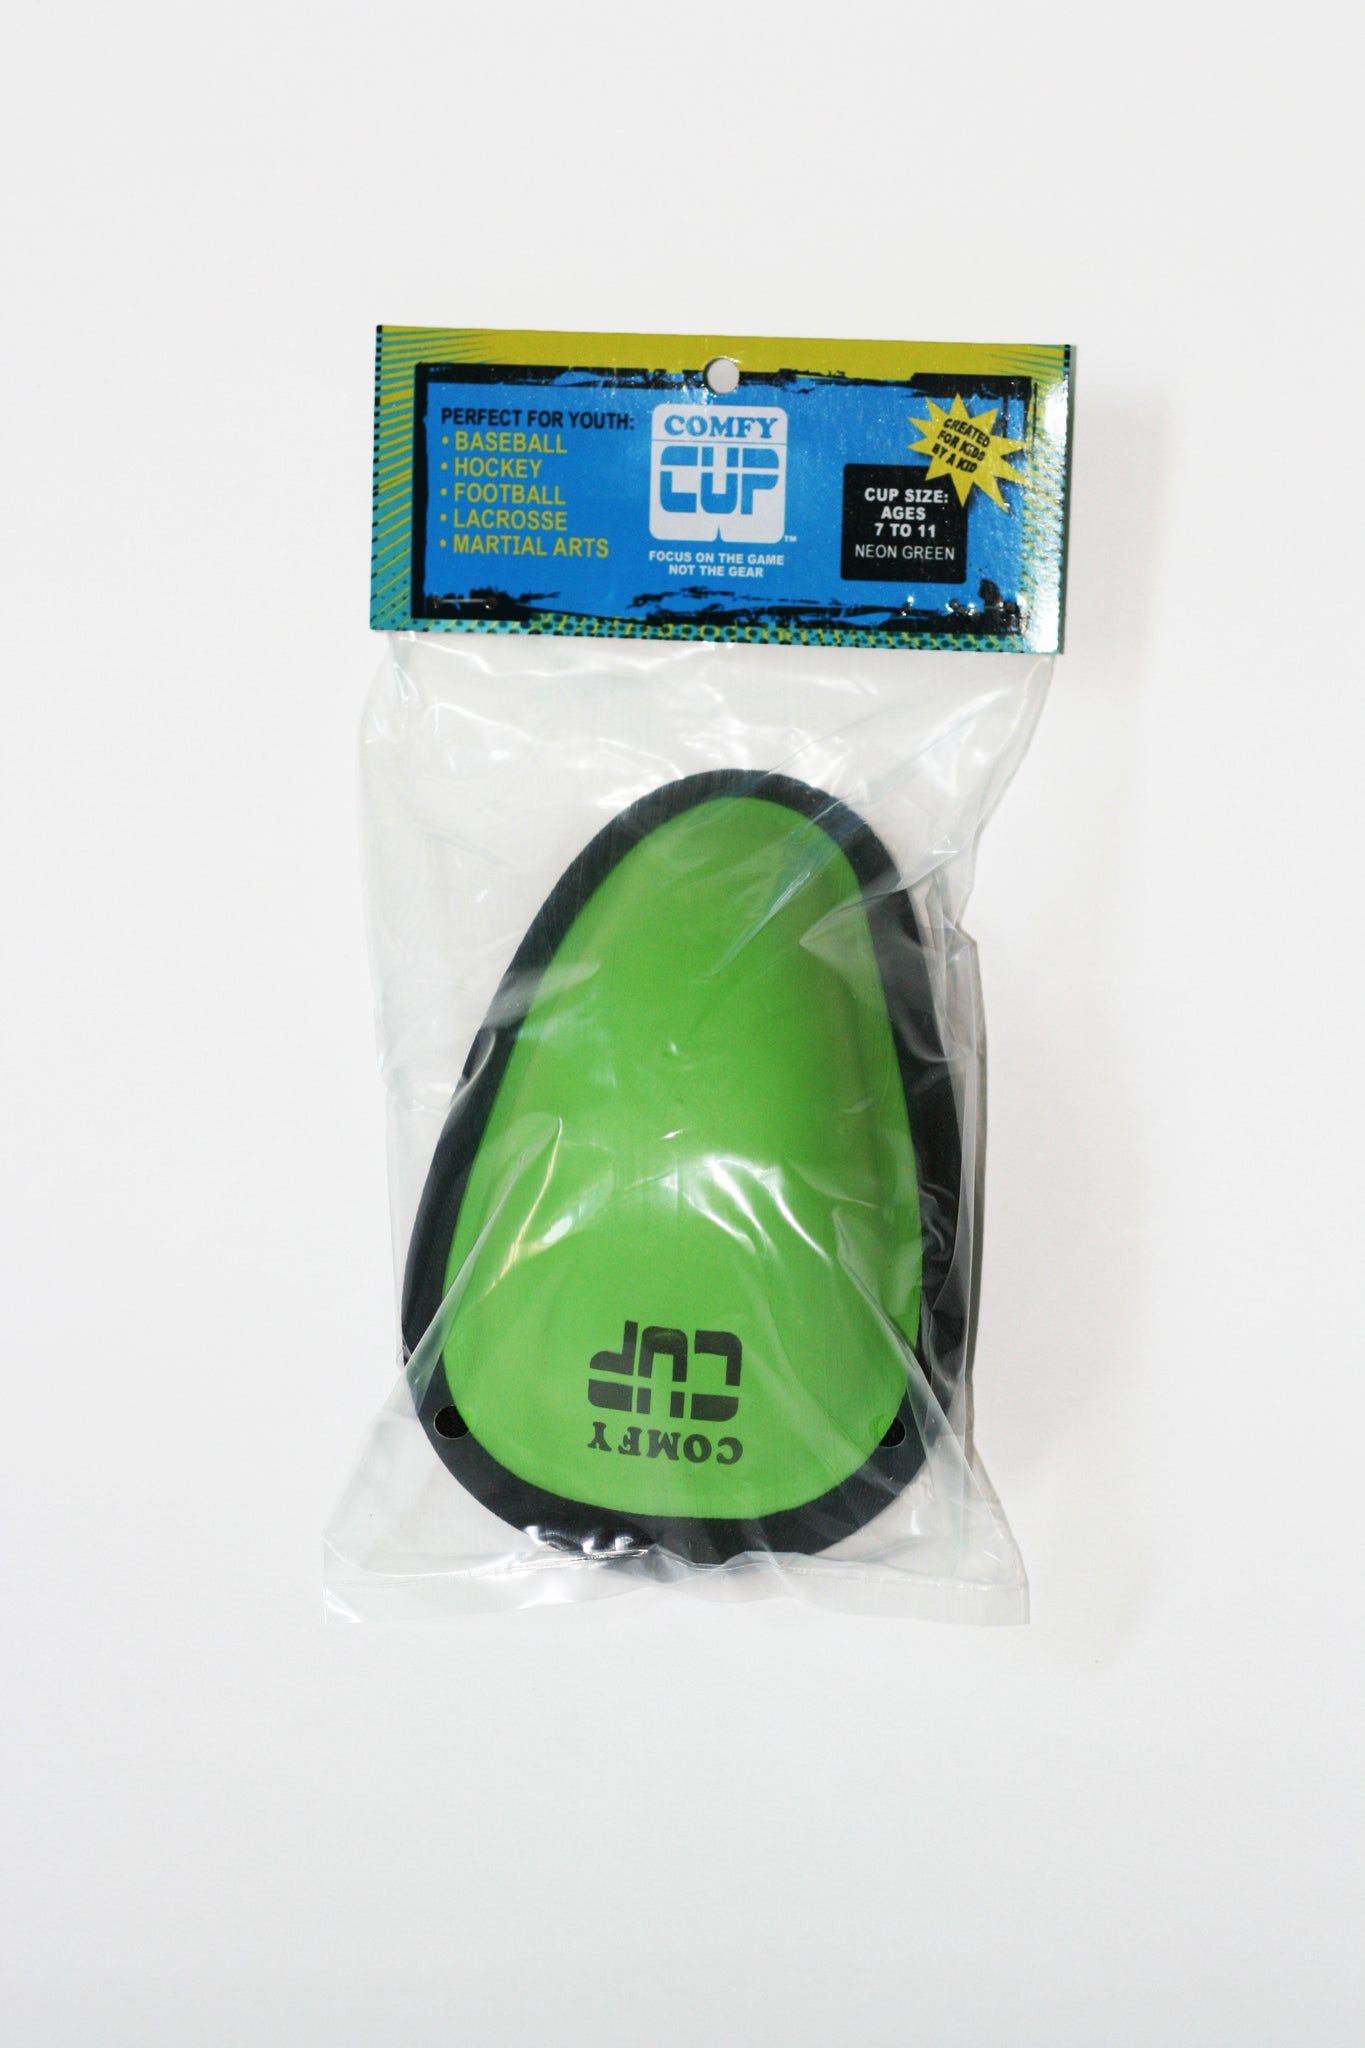 Easy to open packaging. Comfy Cup is lightweight, soft and flexible. Sized for boys ages 7-11 years old.